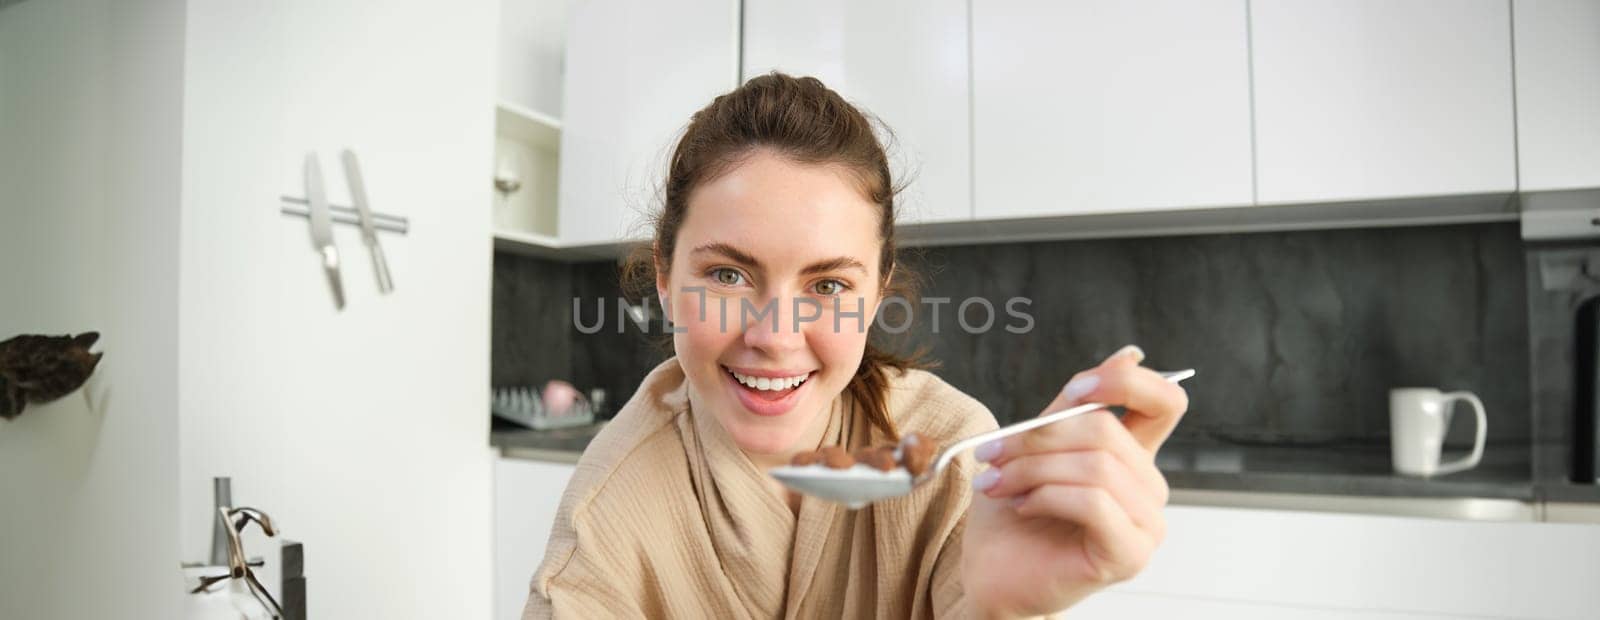 Portrait of happy young woman leans on kitchen worktop and eating cereals, has milk and bowl in front of her, having her breakfast, wearing bathrobe.